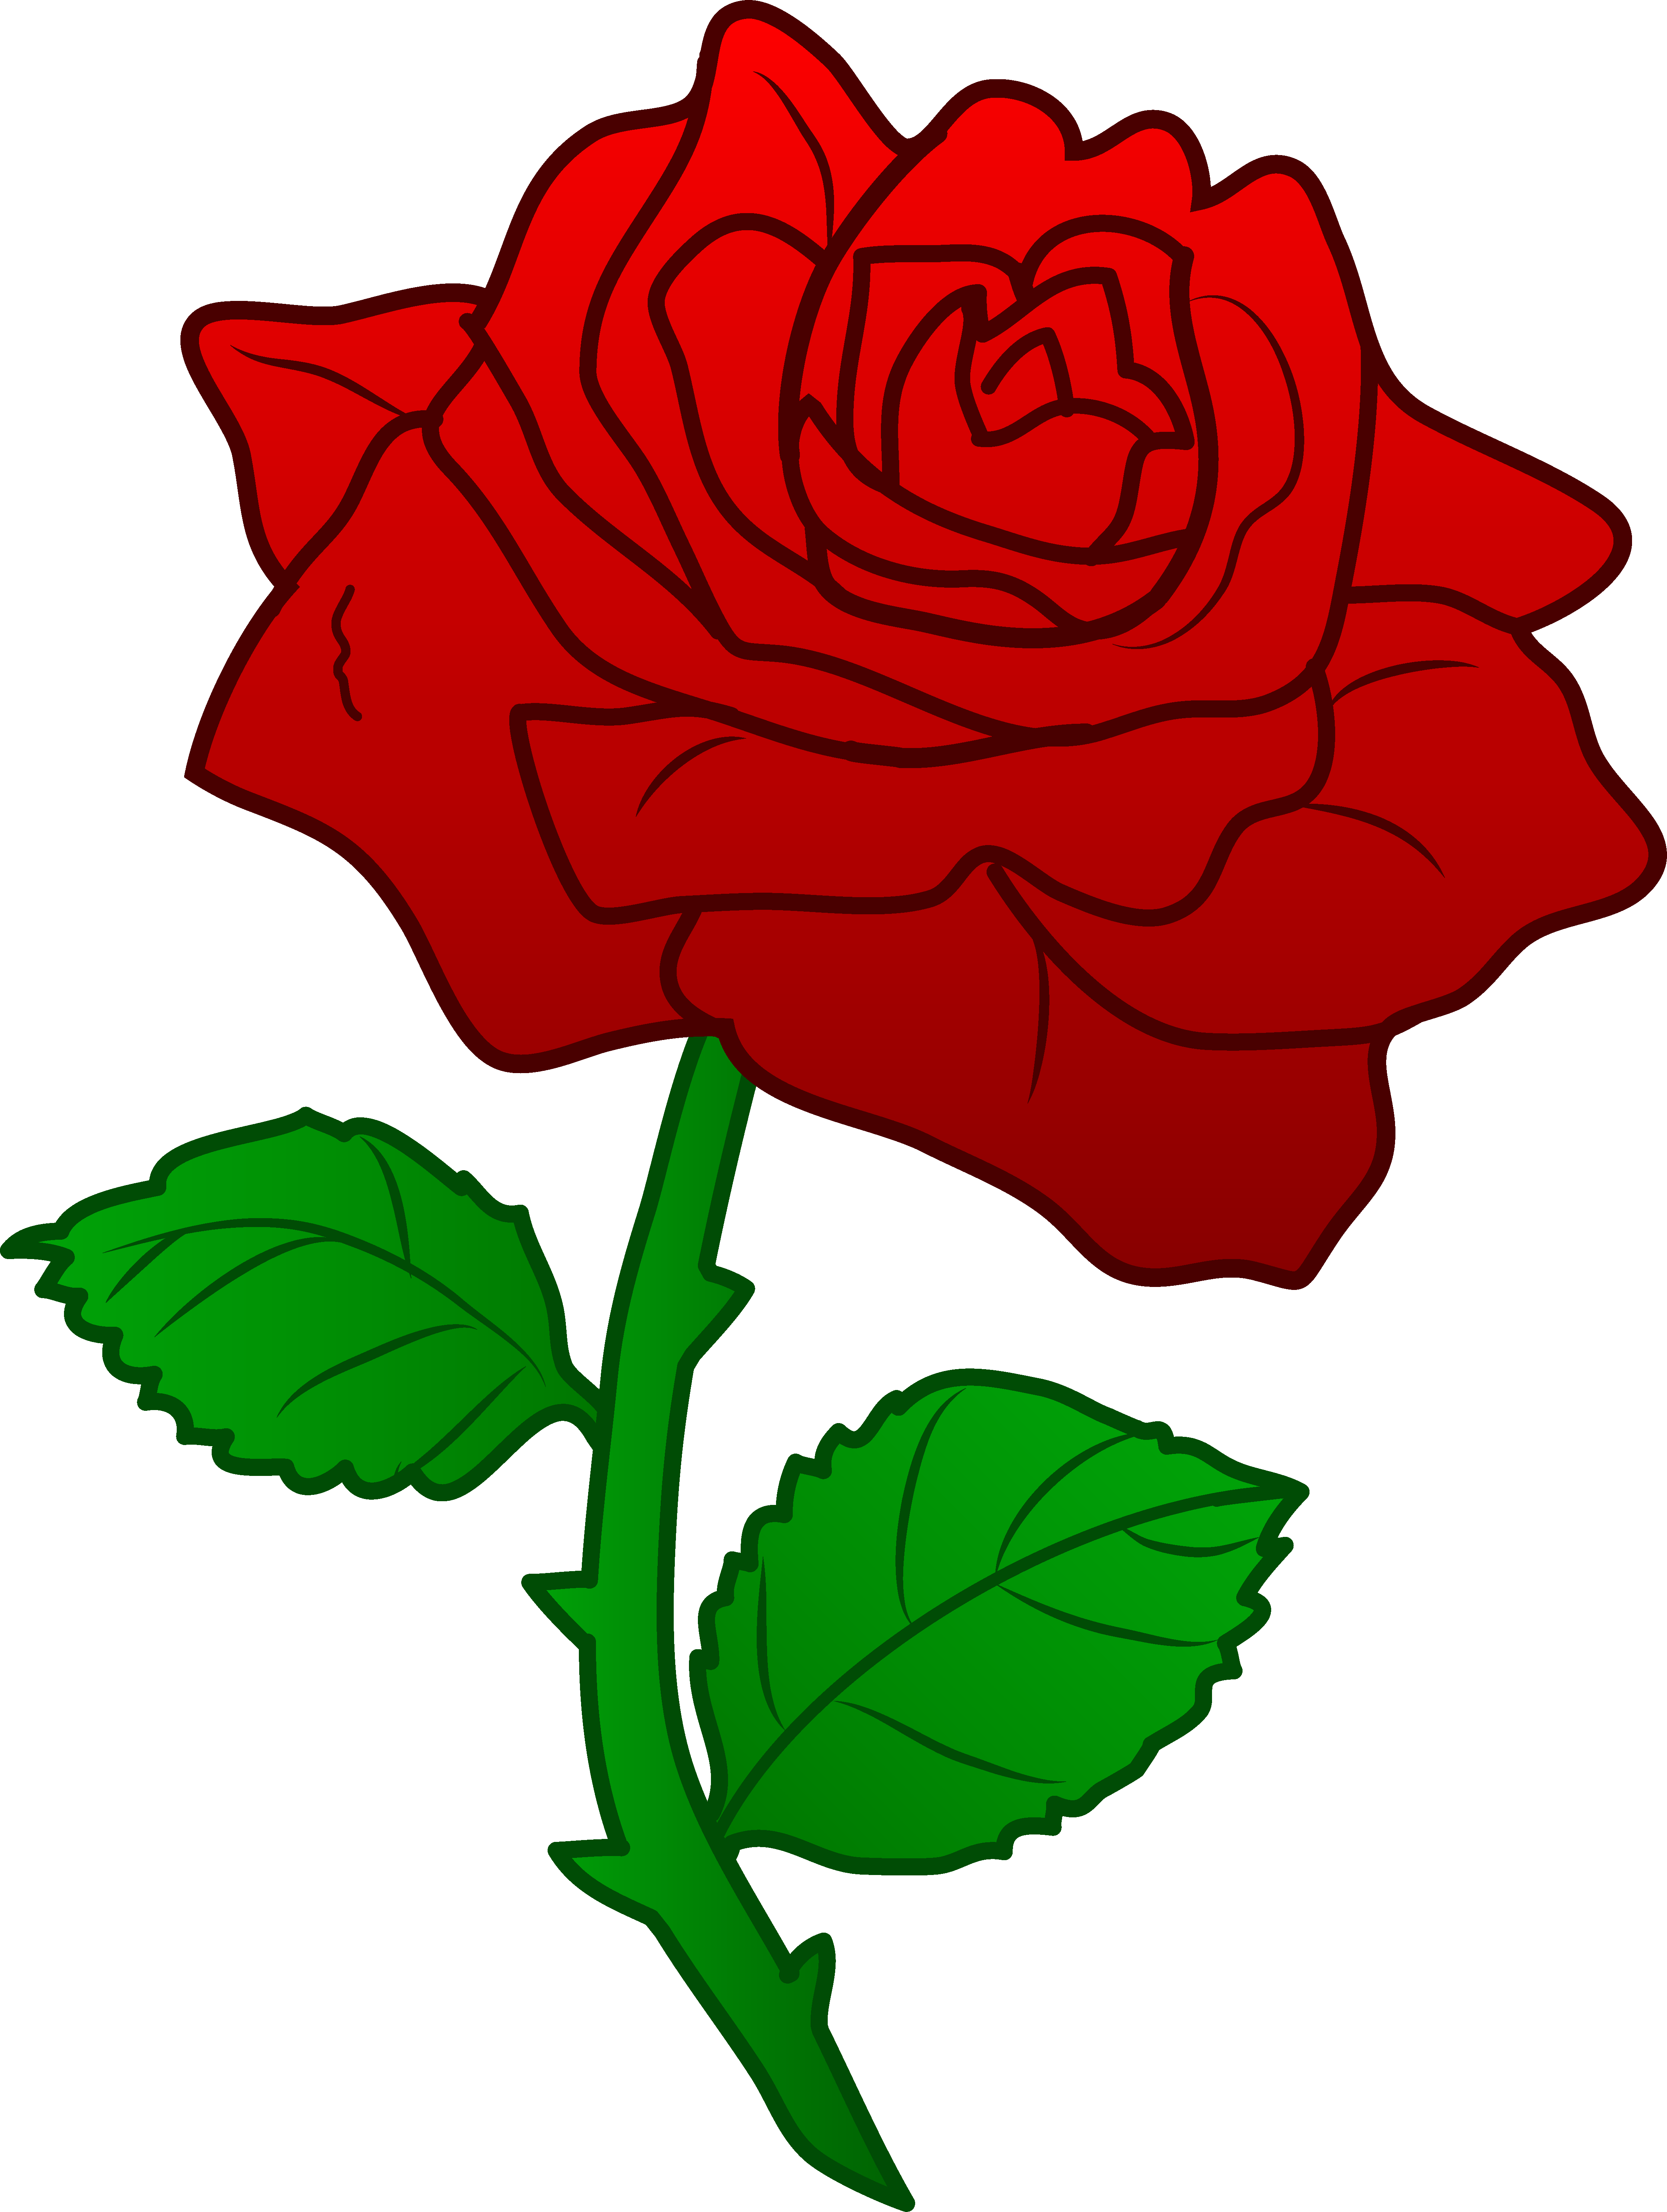 Clipart flower rose free clipart images